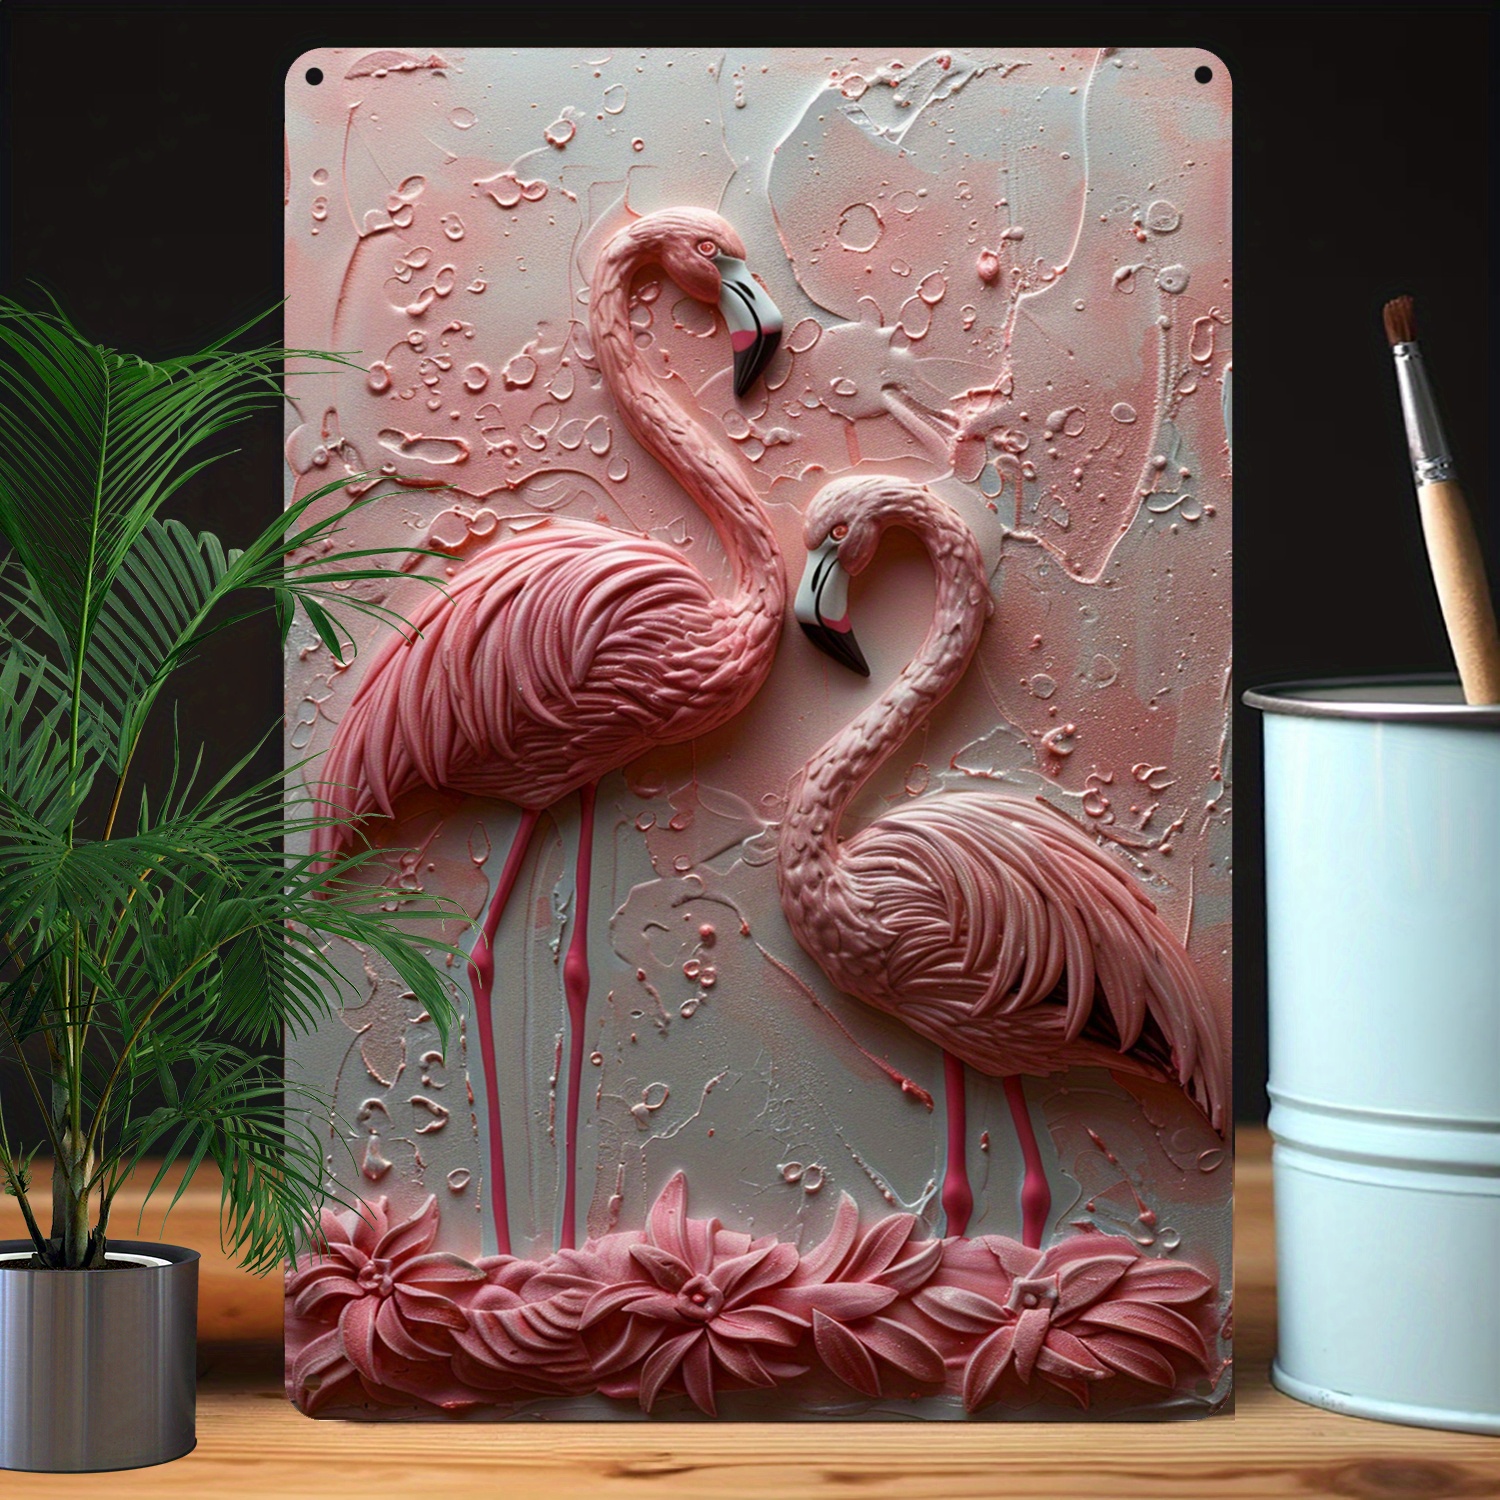 

Flamingo Wall Art Aluminum Sign, 8x12 Inch, 3d Relief Design, Durable Metal Decor For Home, Office, And Bathroom, Water & Bend Resistant, Gift A1022